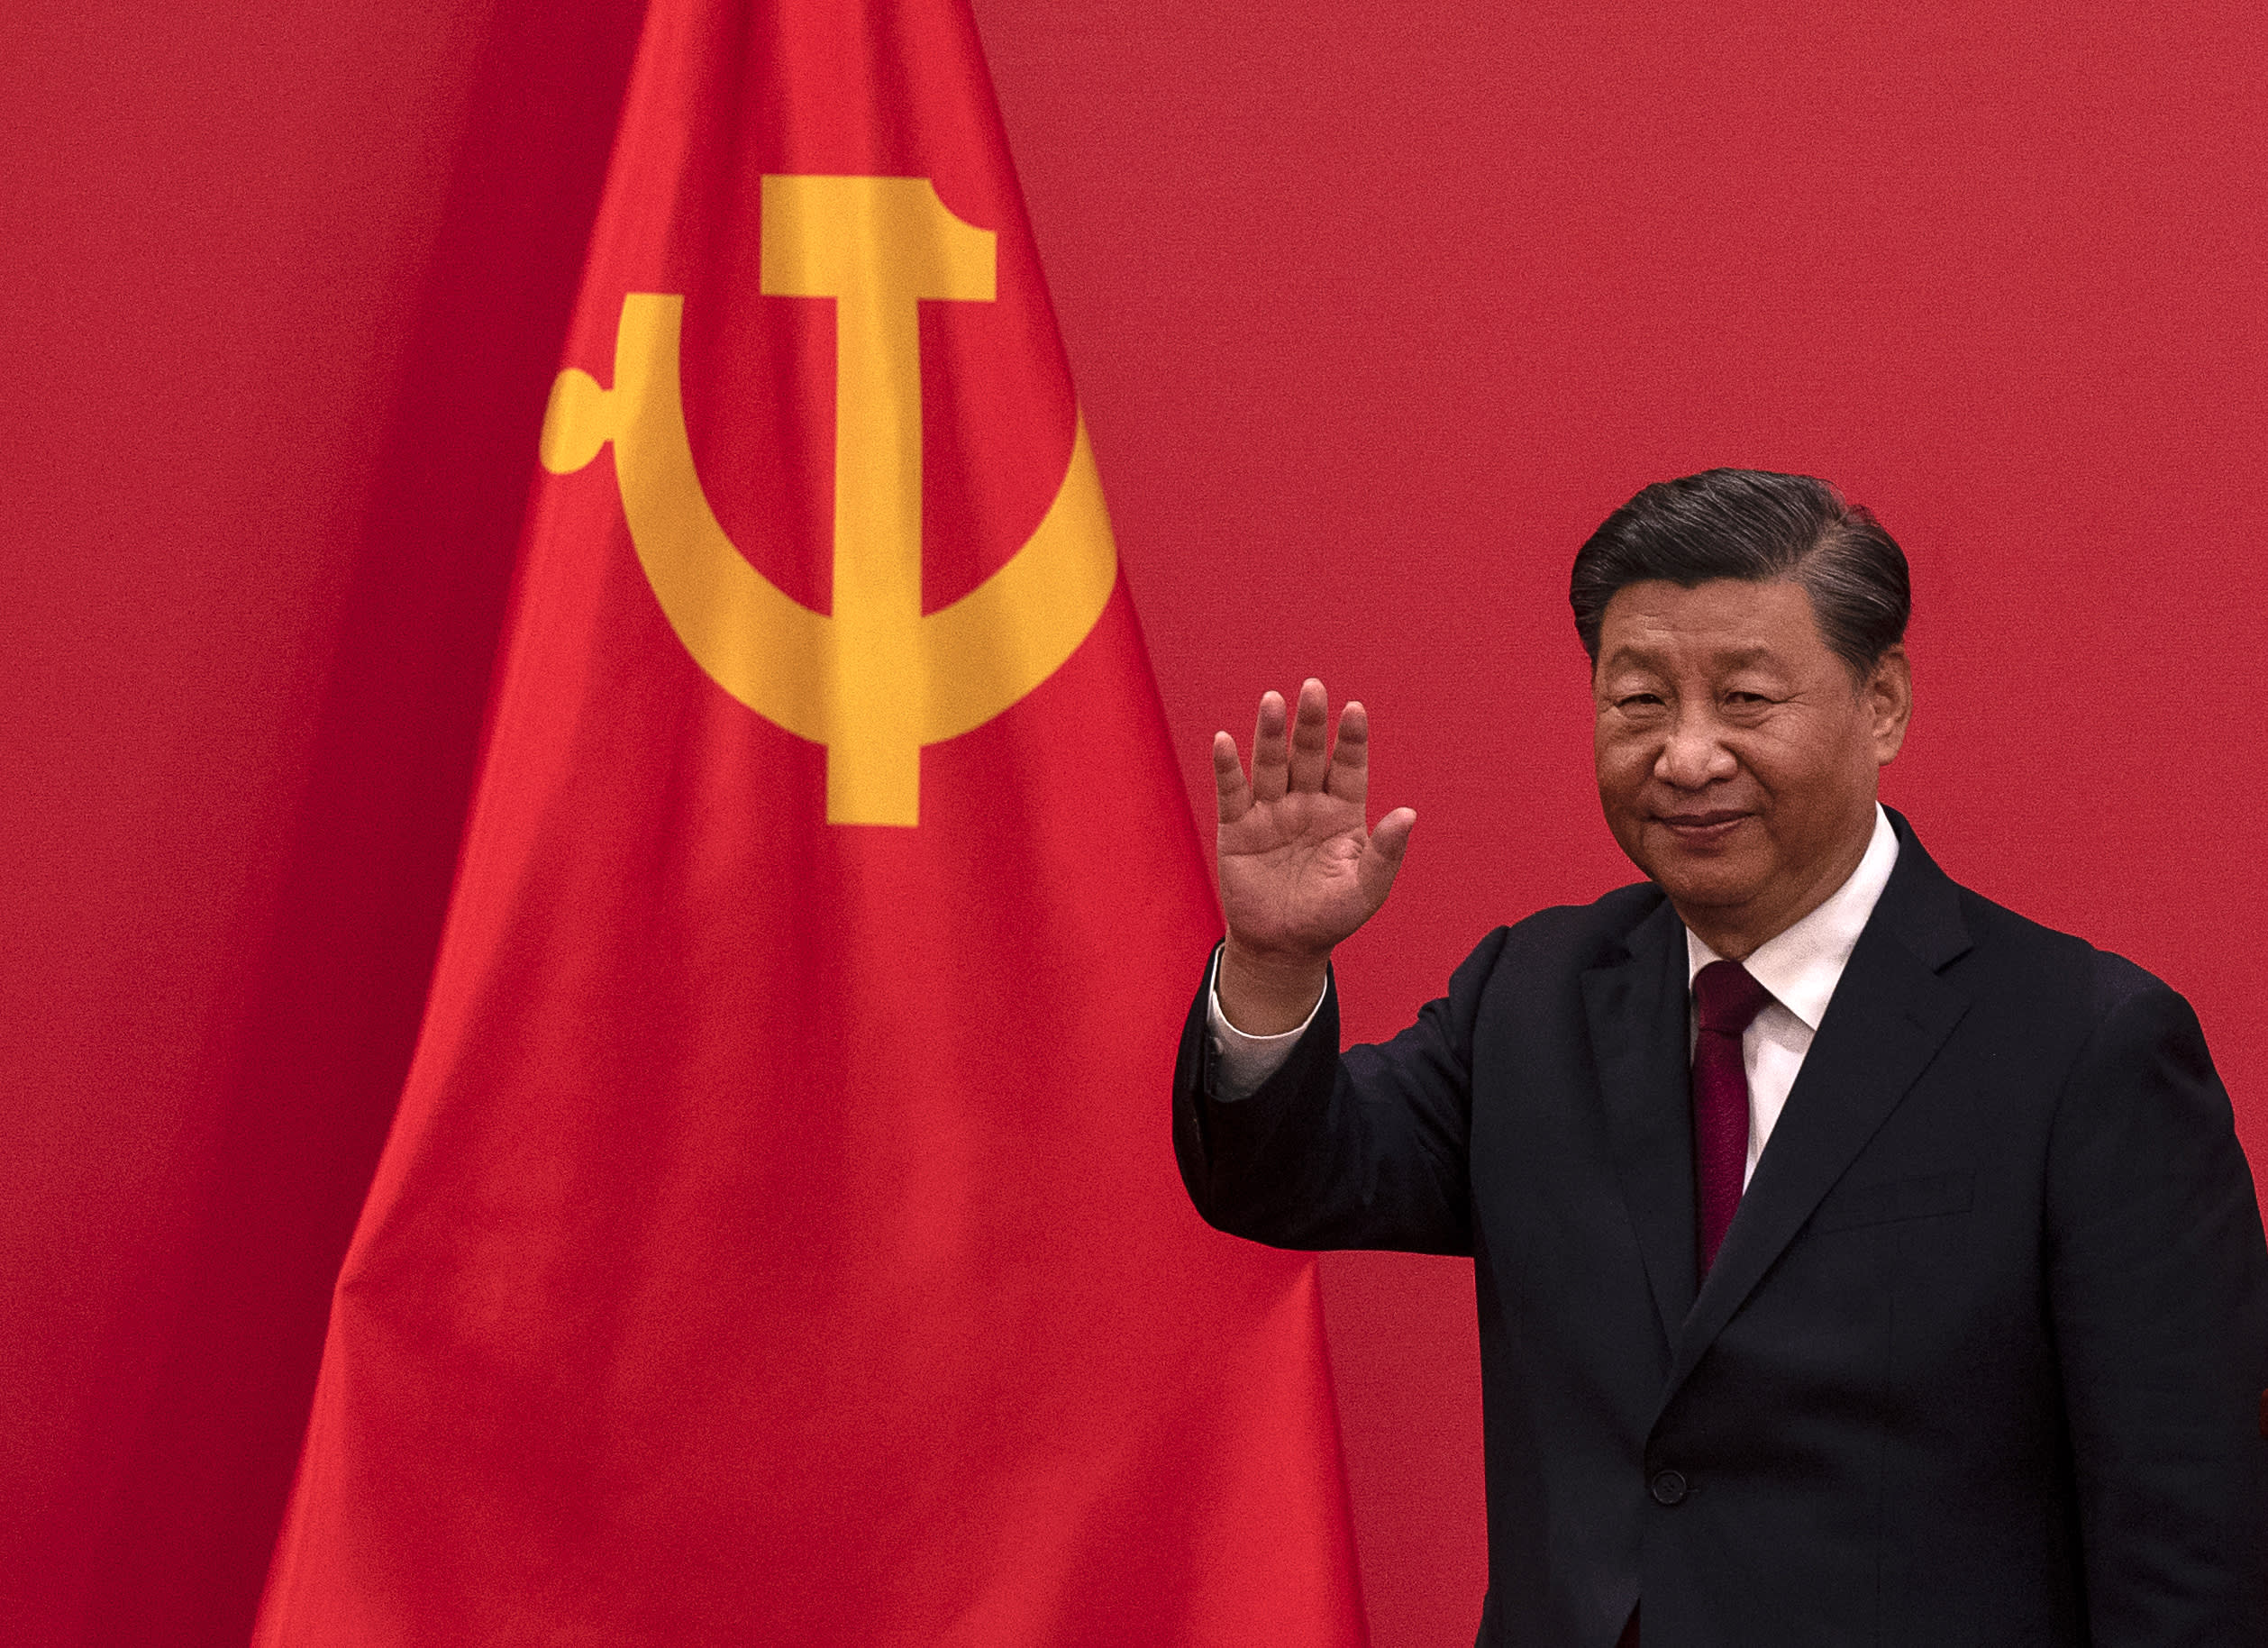 The Chinese president has secured an unprecedented third term as president